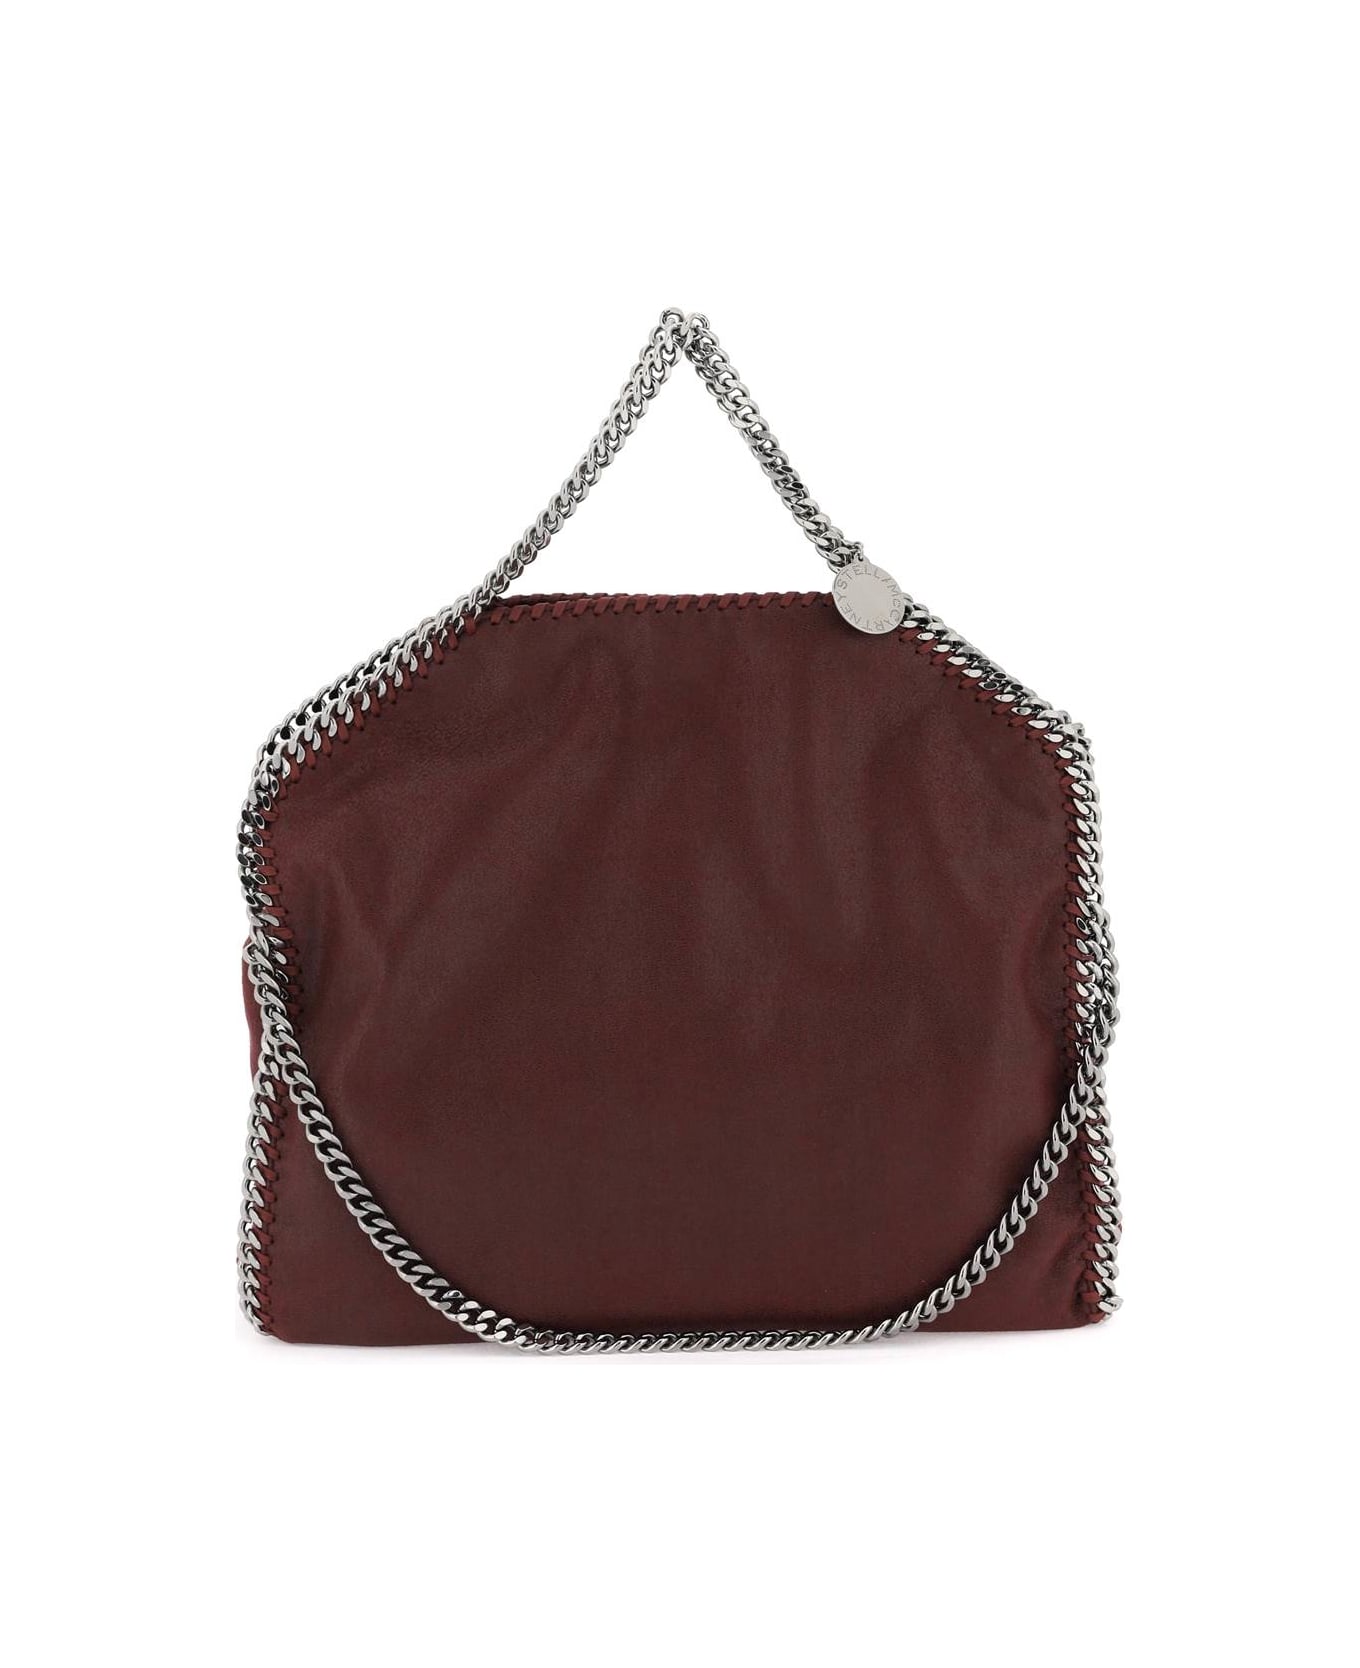 Stella McCartney Falabella Fold Over Tote Bag - Red トートバッグ